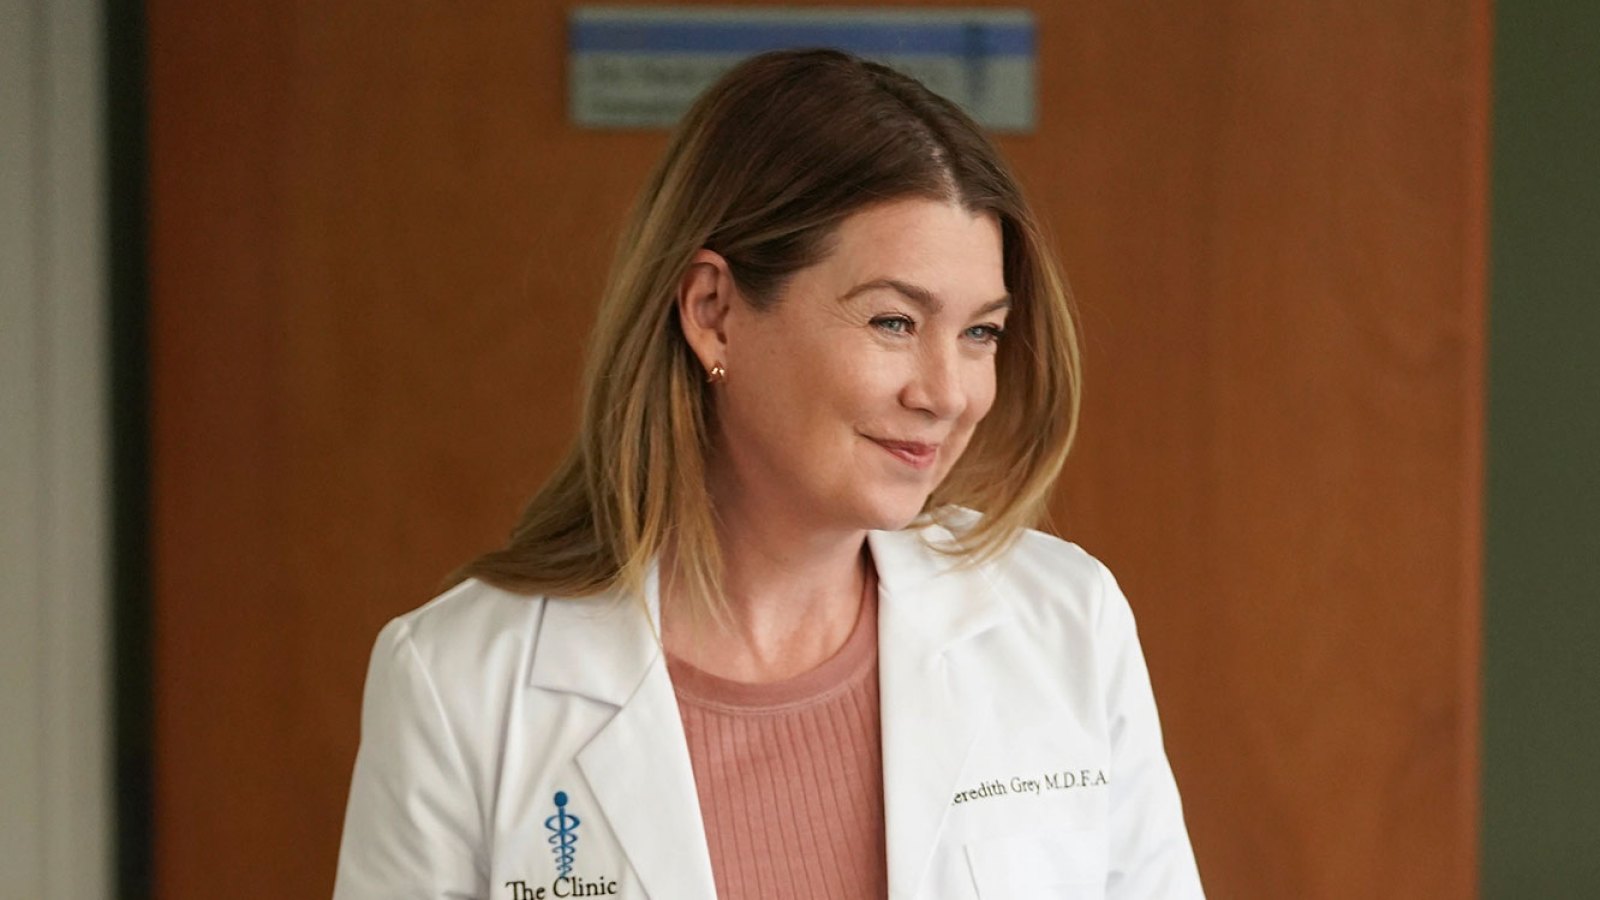 Ellen Pompeo Breaks Silence on Decision to Step Back From 'Grey's Anatomy,' Says Show Will Be 'Just Fine Without' Her